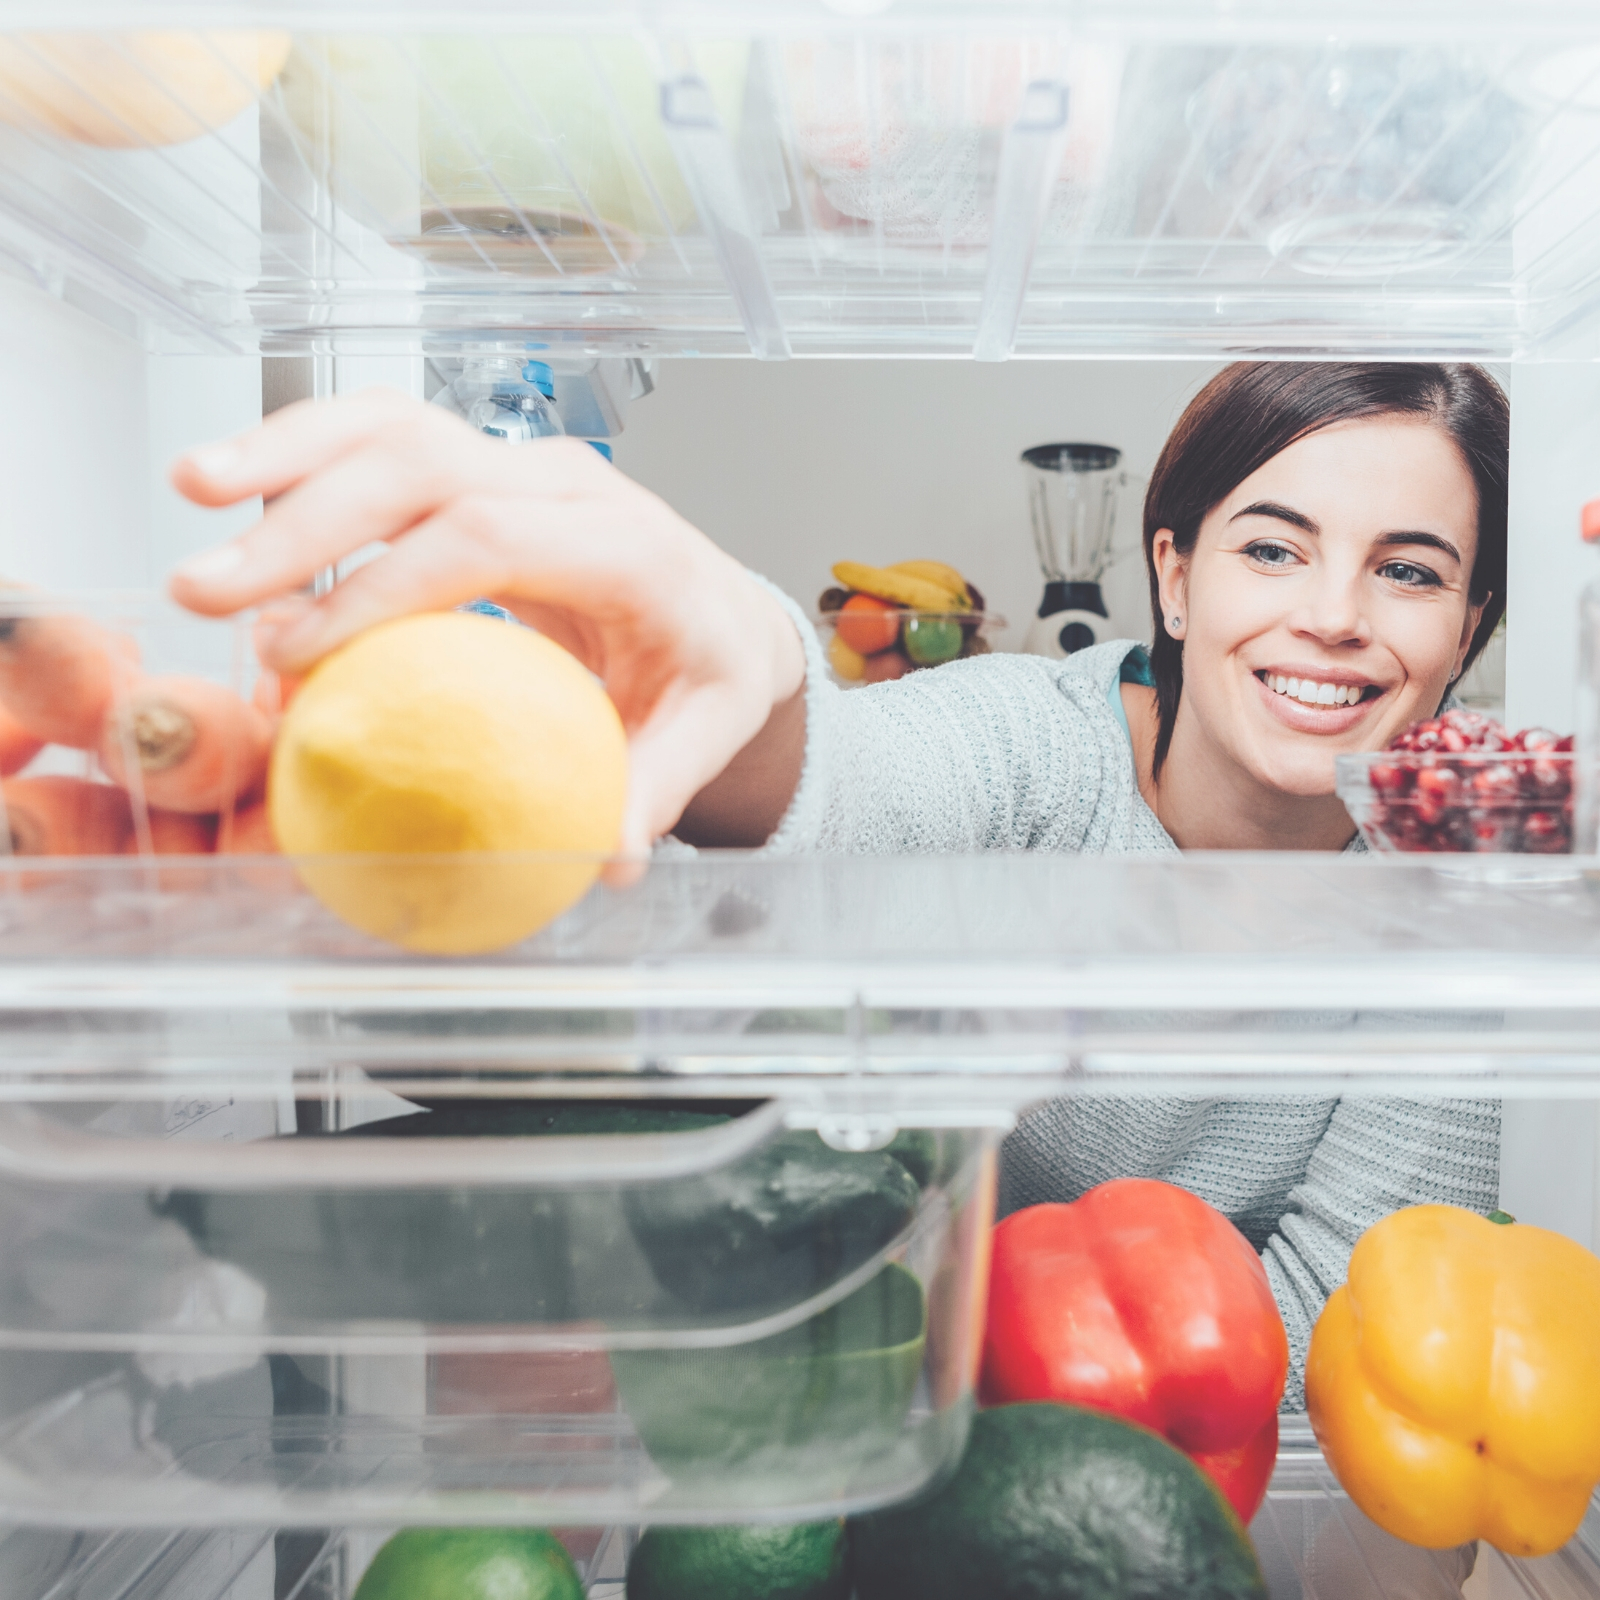 How to Clean a Messy Refrigerator